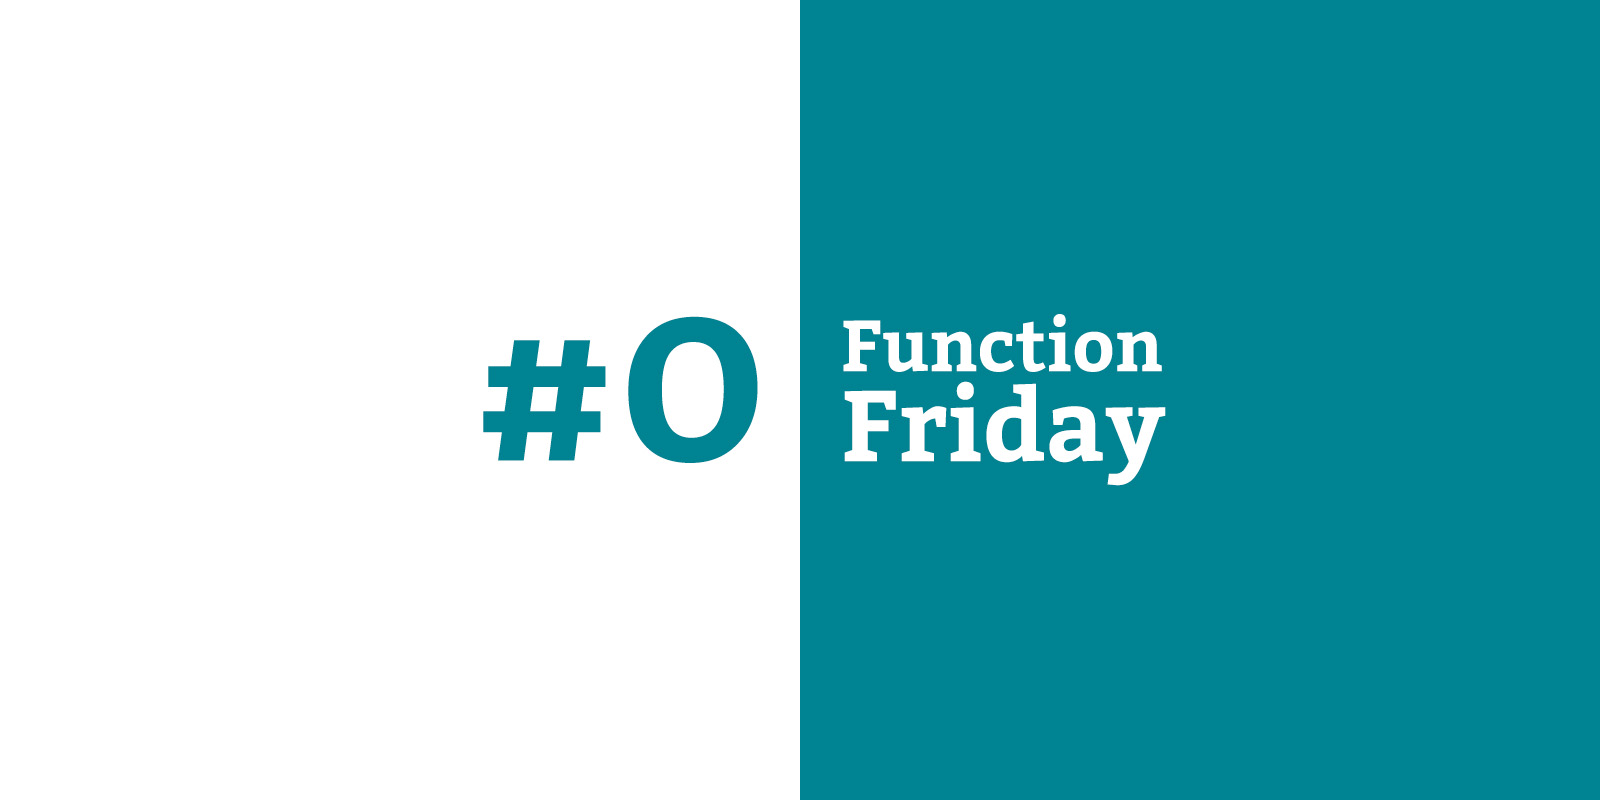 Function Friday #0